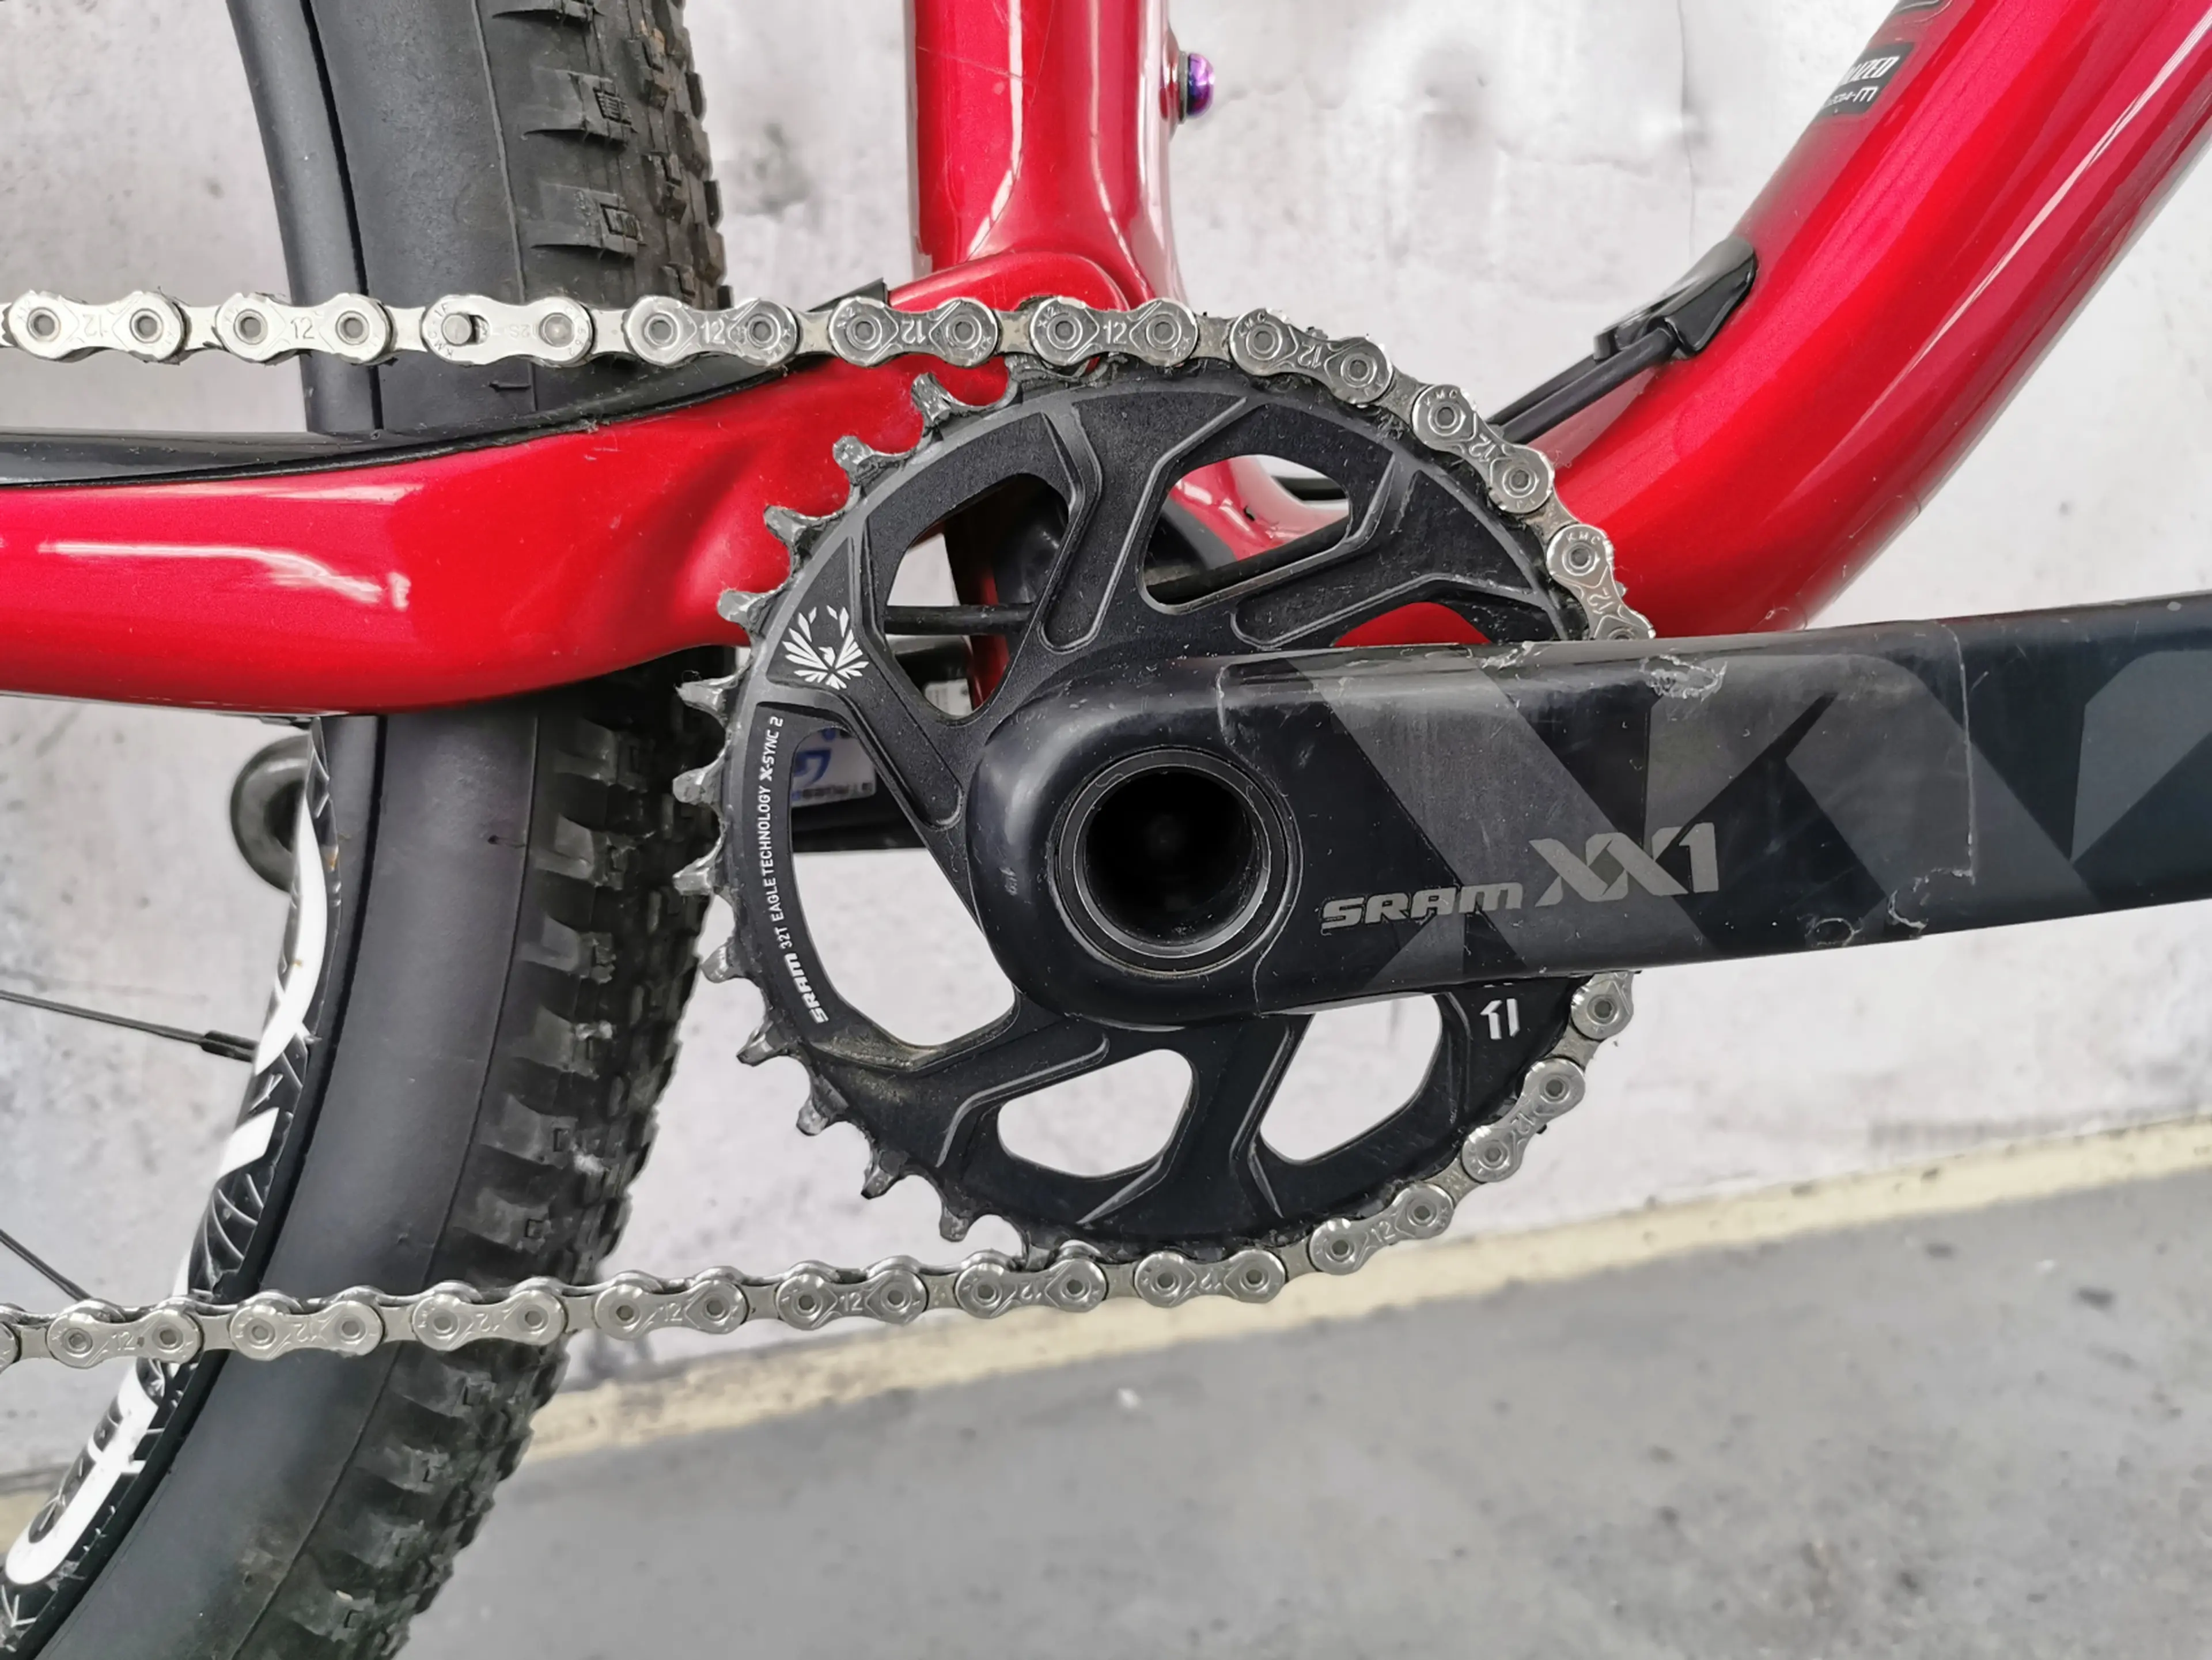 8. Specialized Epic Expert 2018